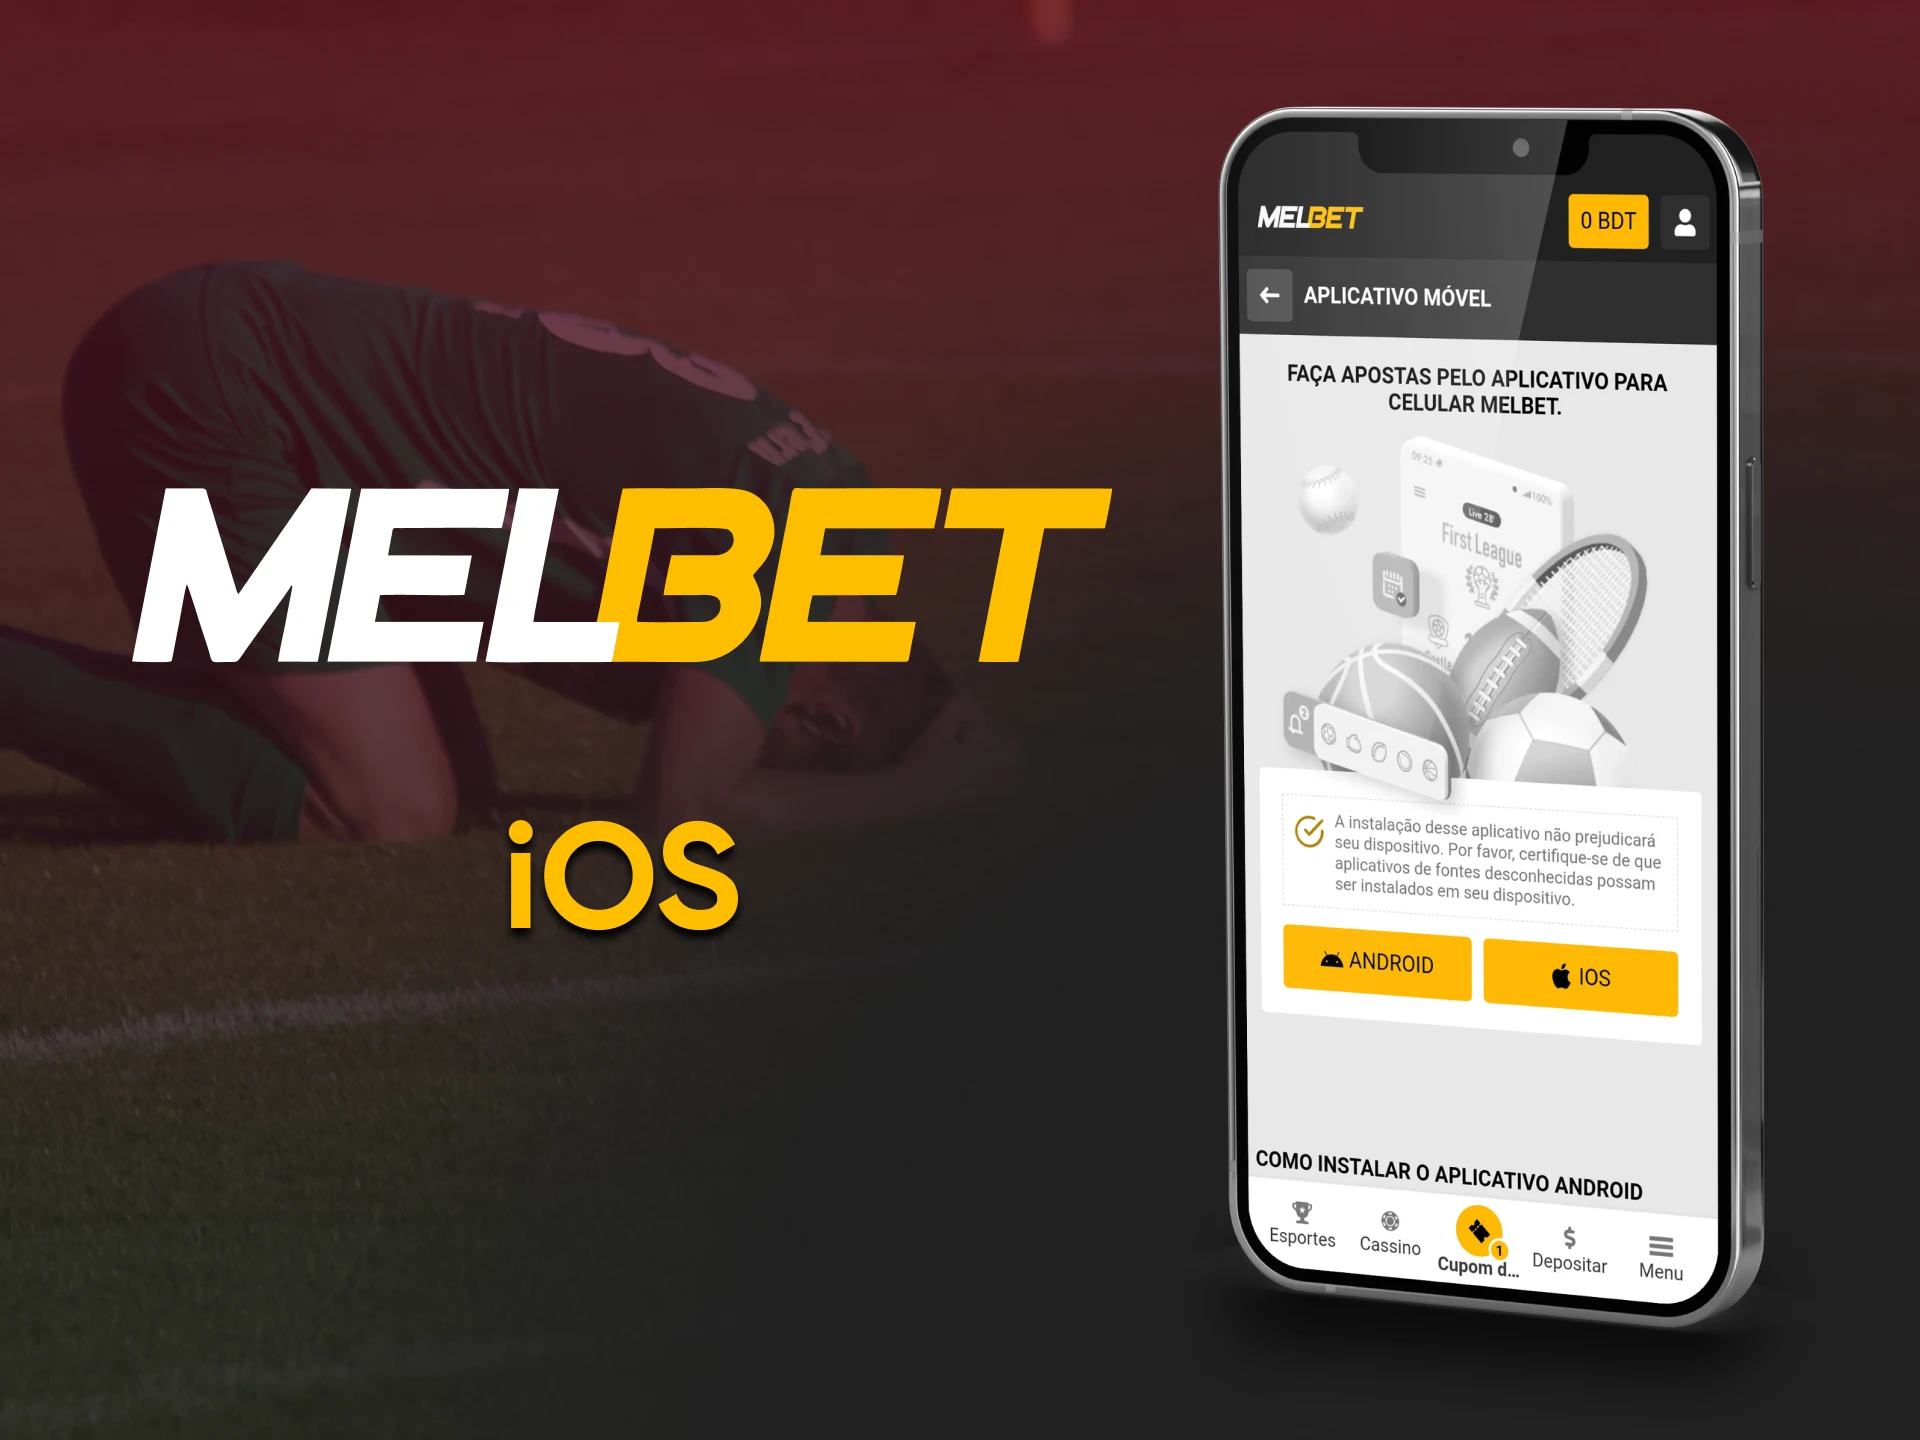 If you want to bet on your mobile phone, you can download the Melbet app for iOS.